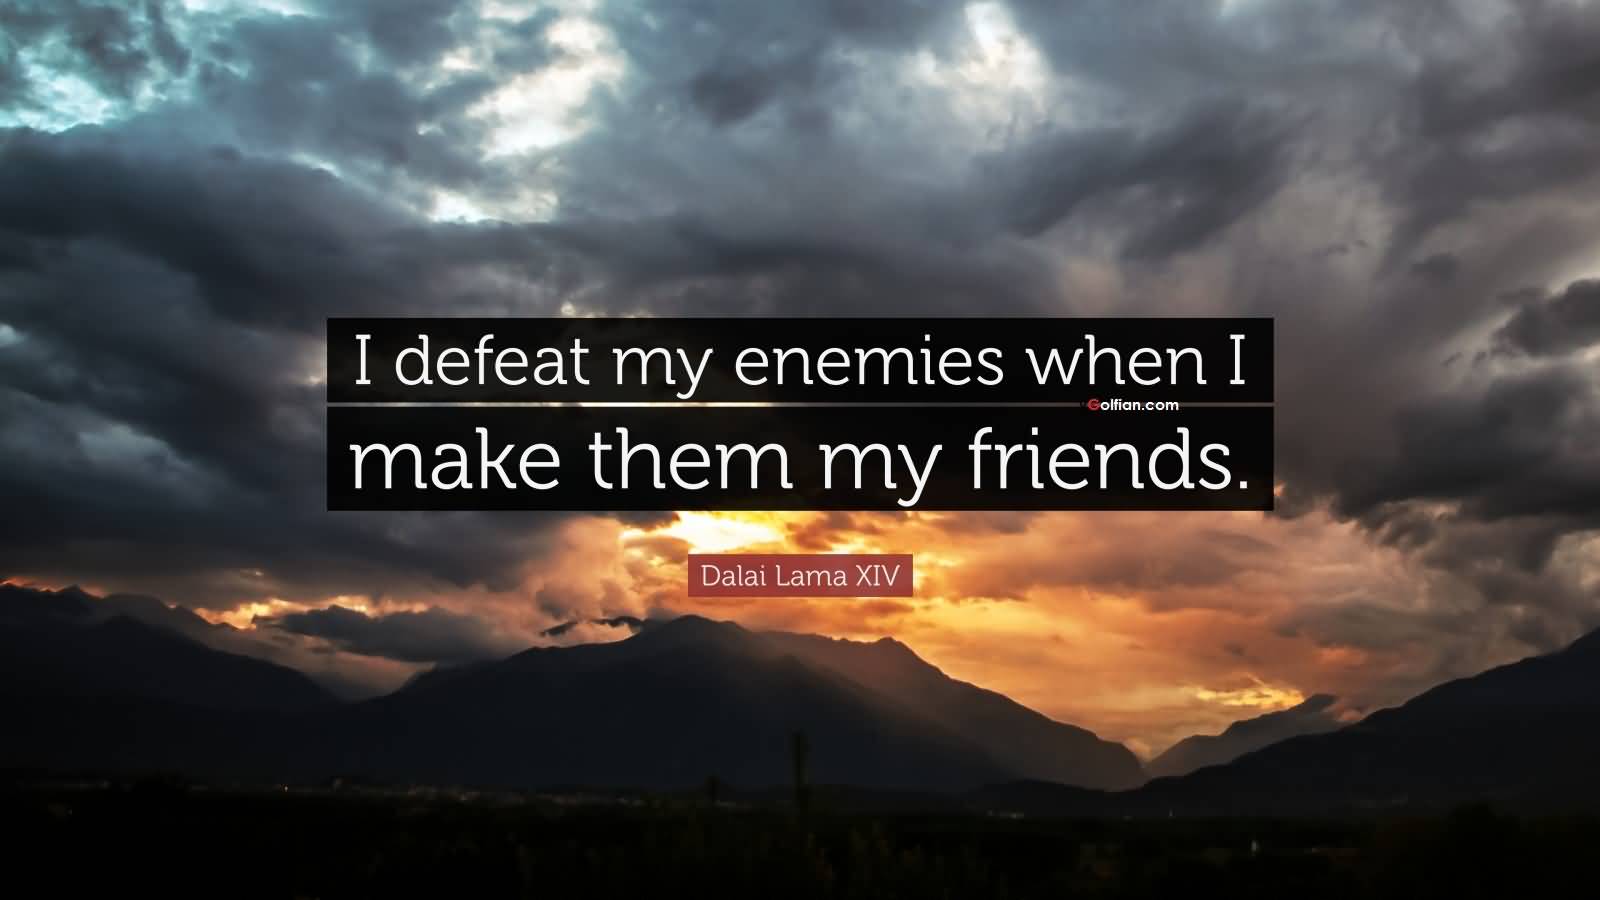 Best Enemy Quotes Short Rival Sayings Image Golfian